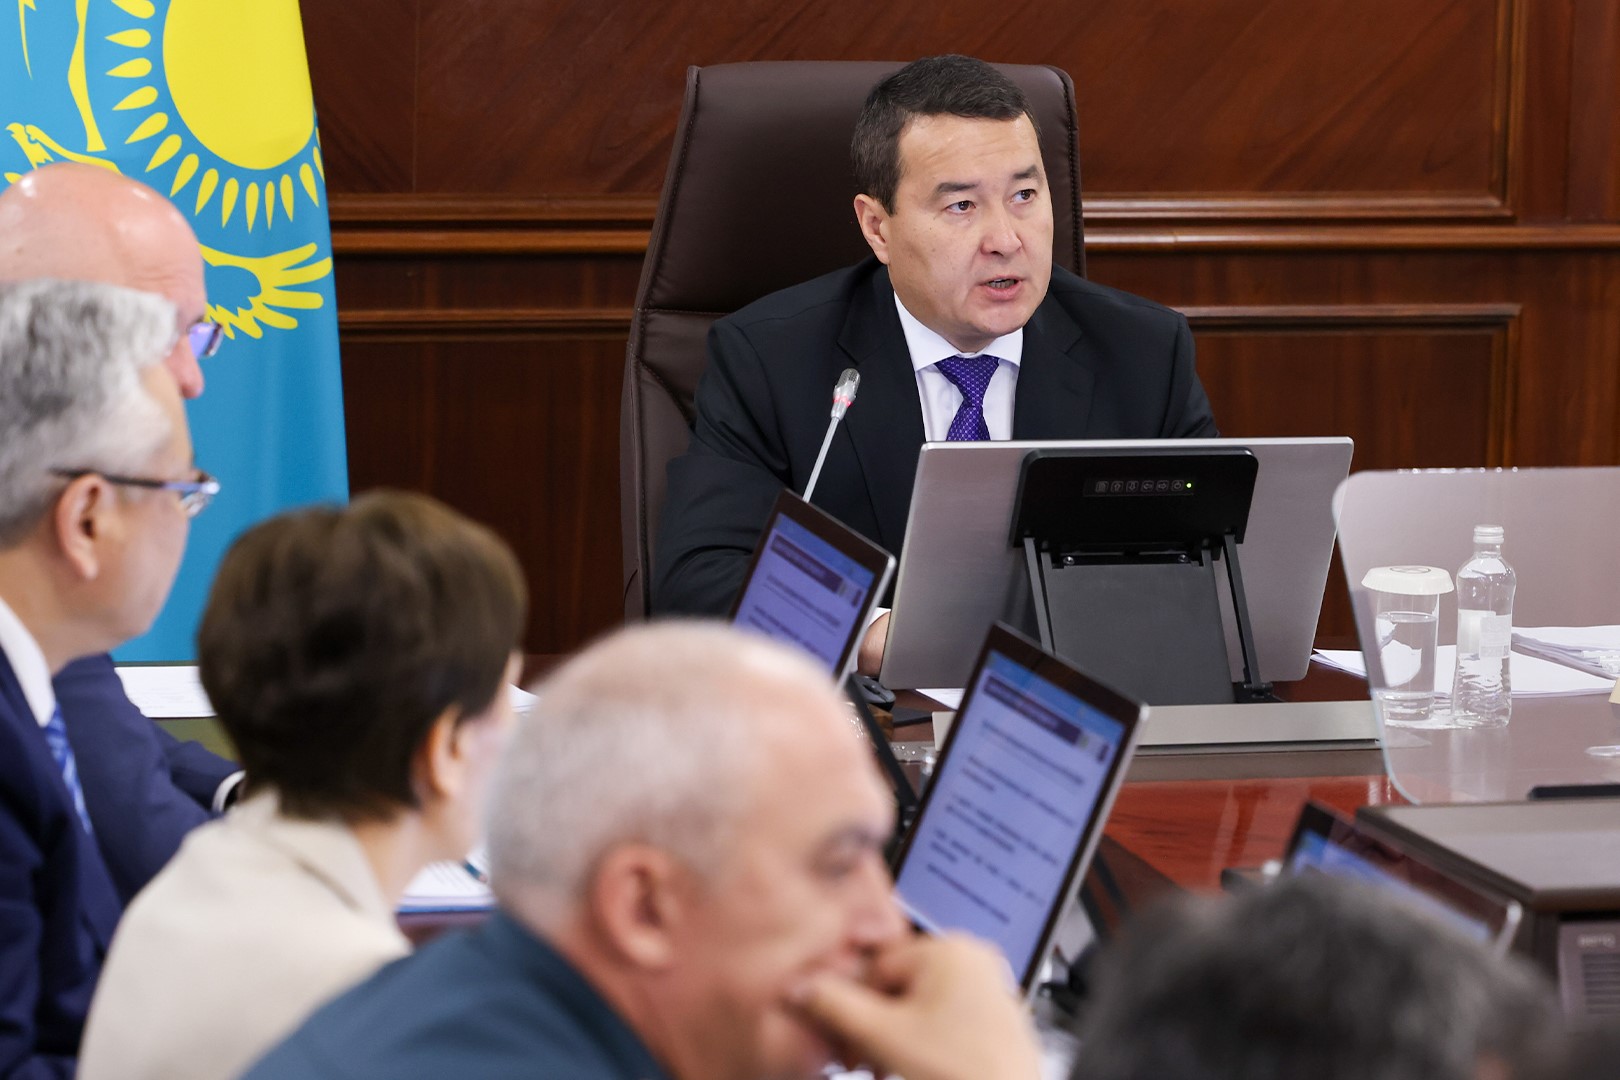 Kazakhstan’s PM Smailov chairing a June 27 government meeting on the new Social Code’s norms. Credit: Primeminister.kz